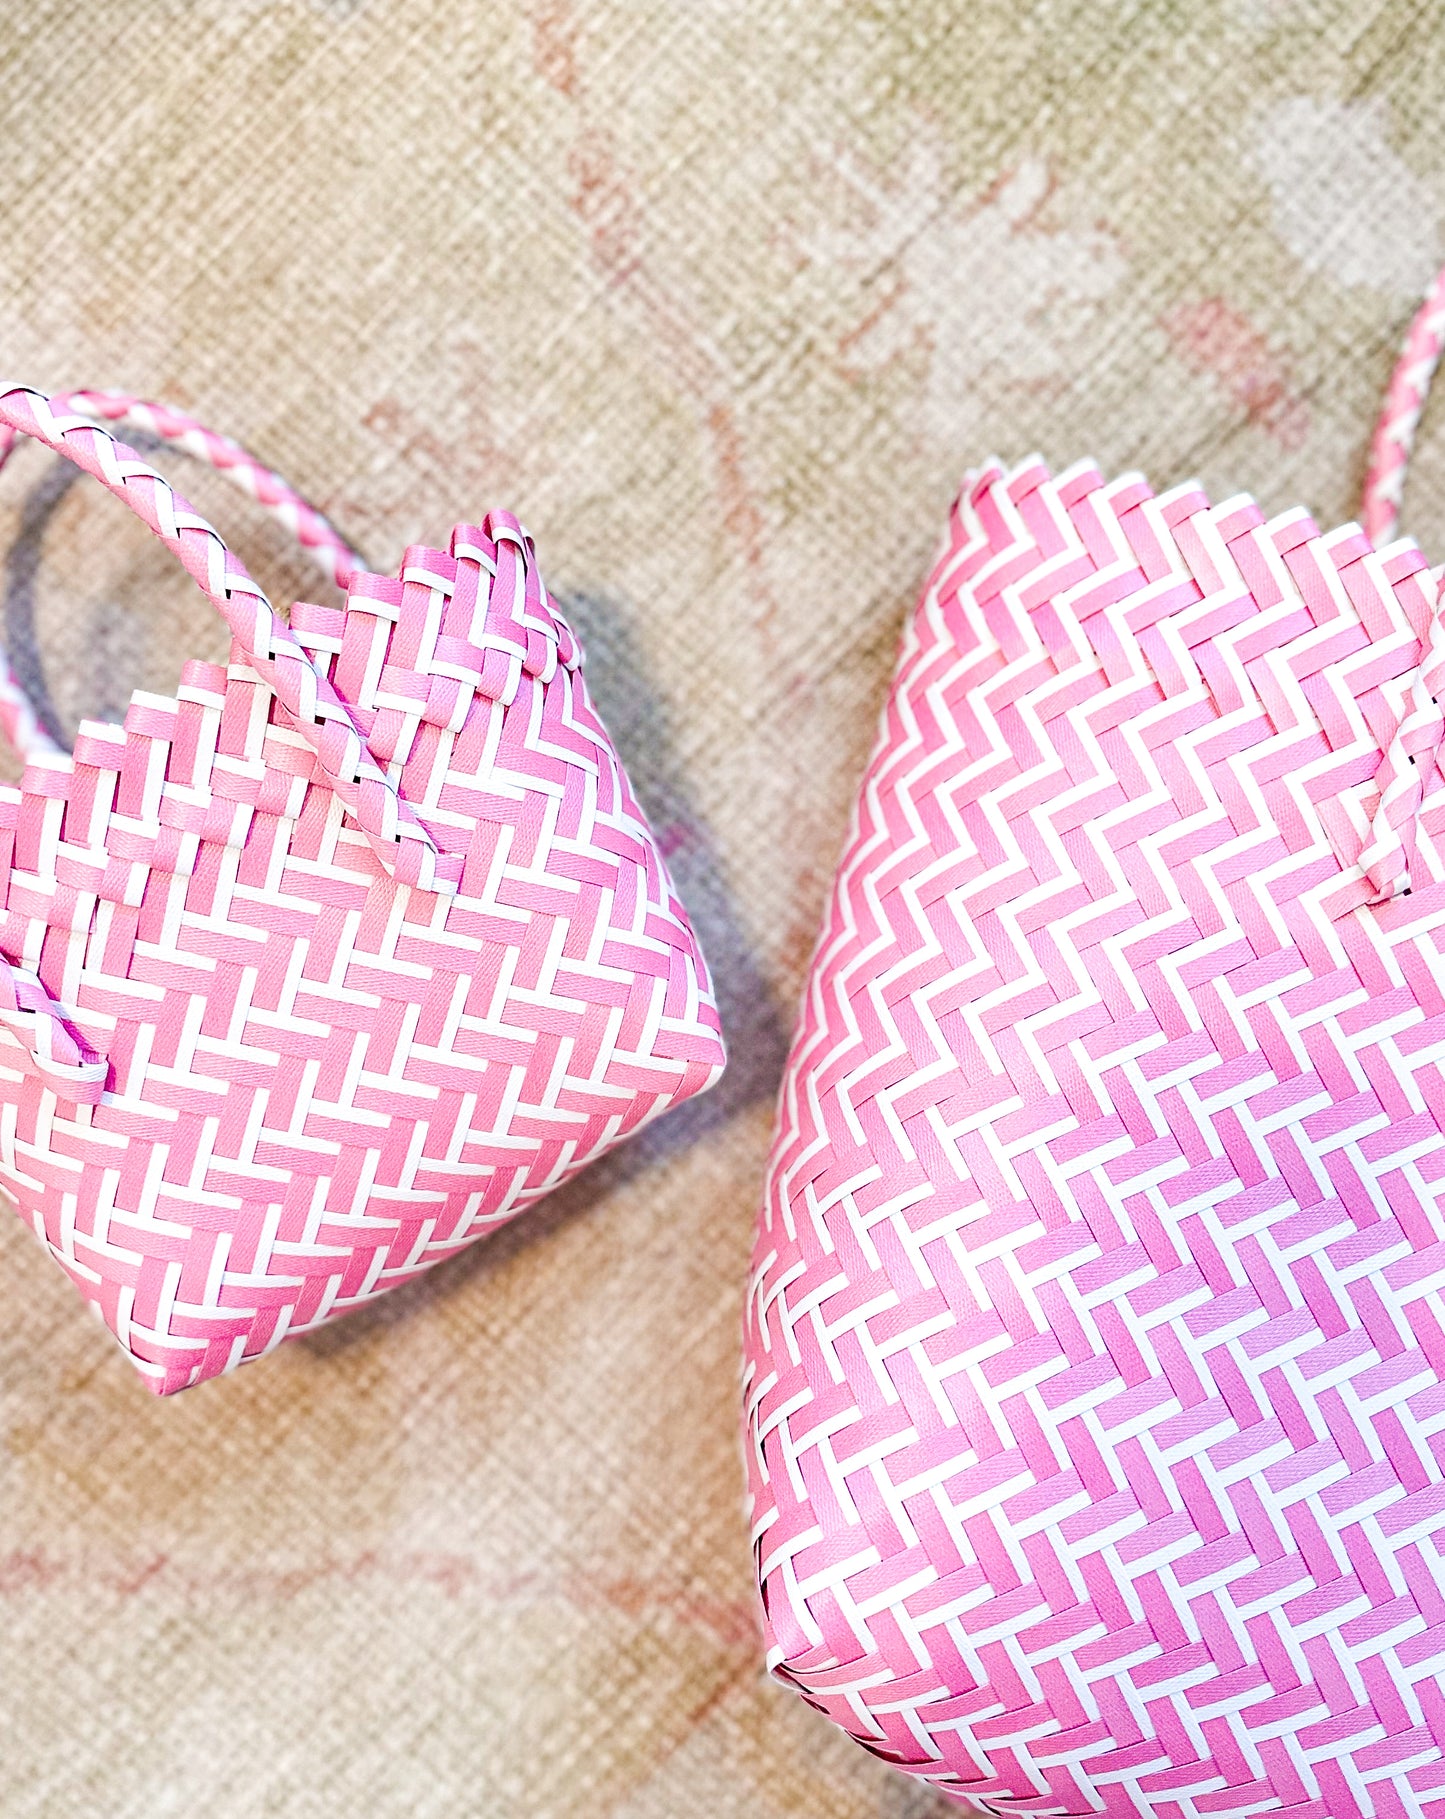 Pink Woven Tote Bag